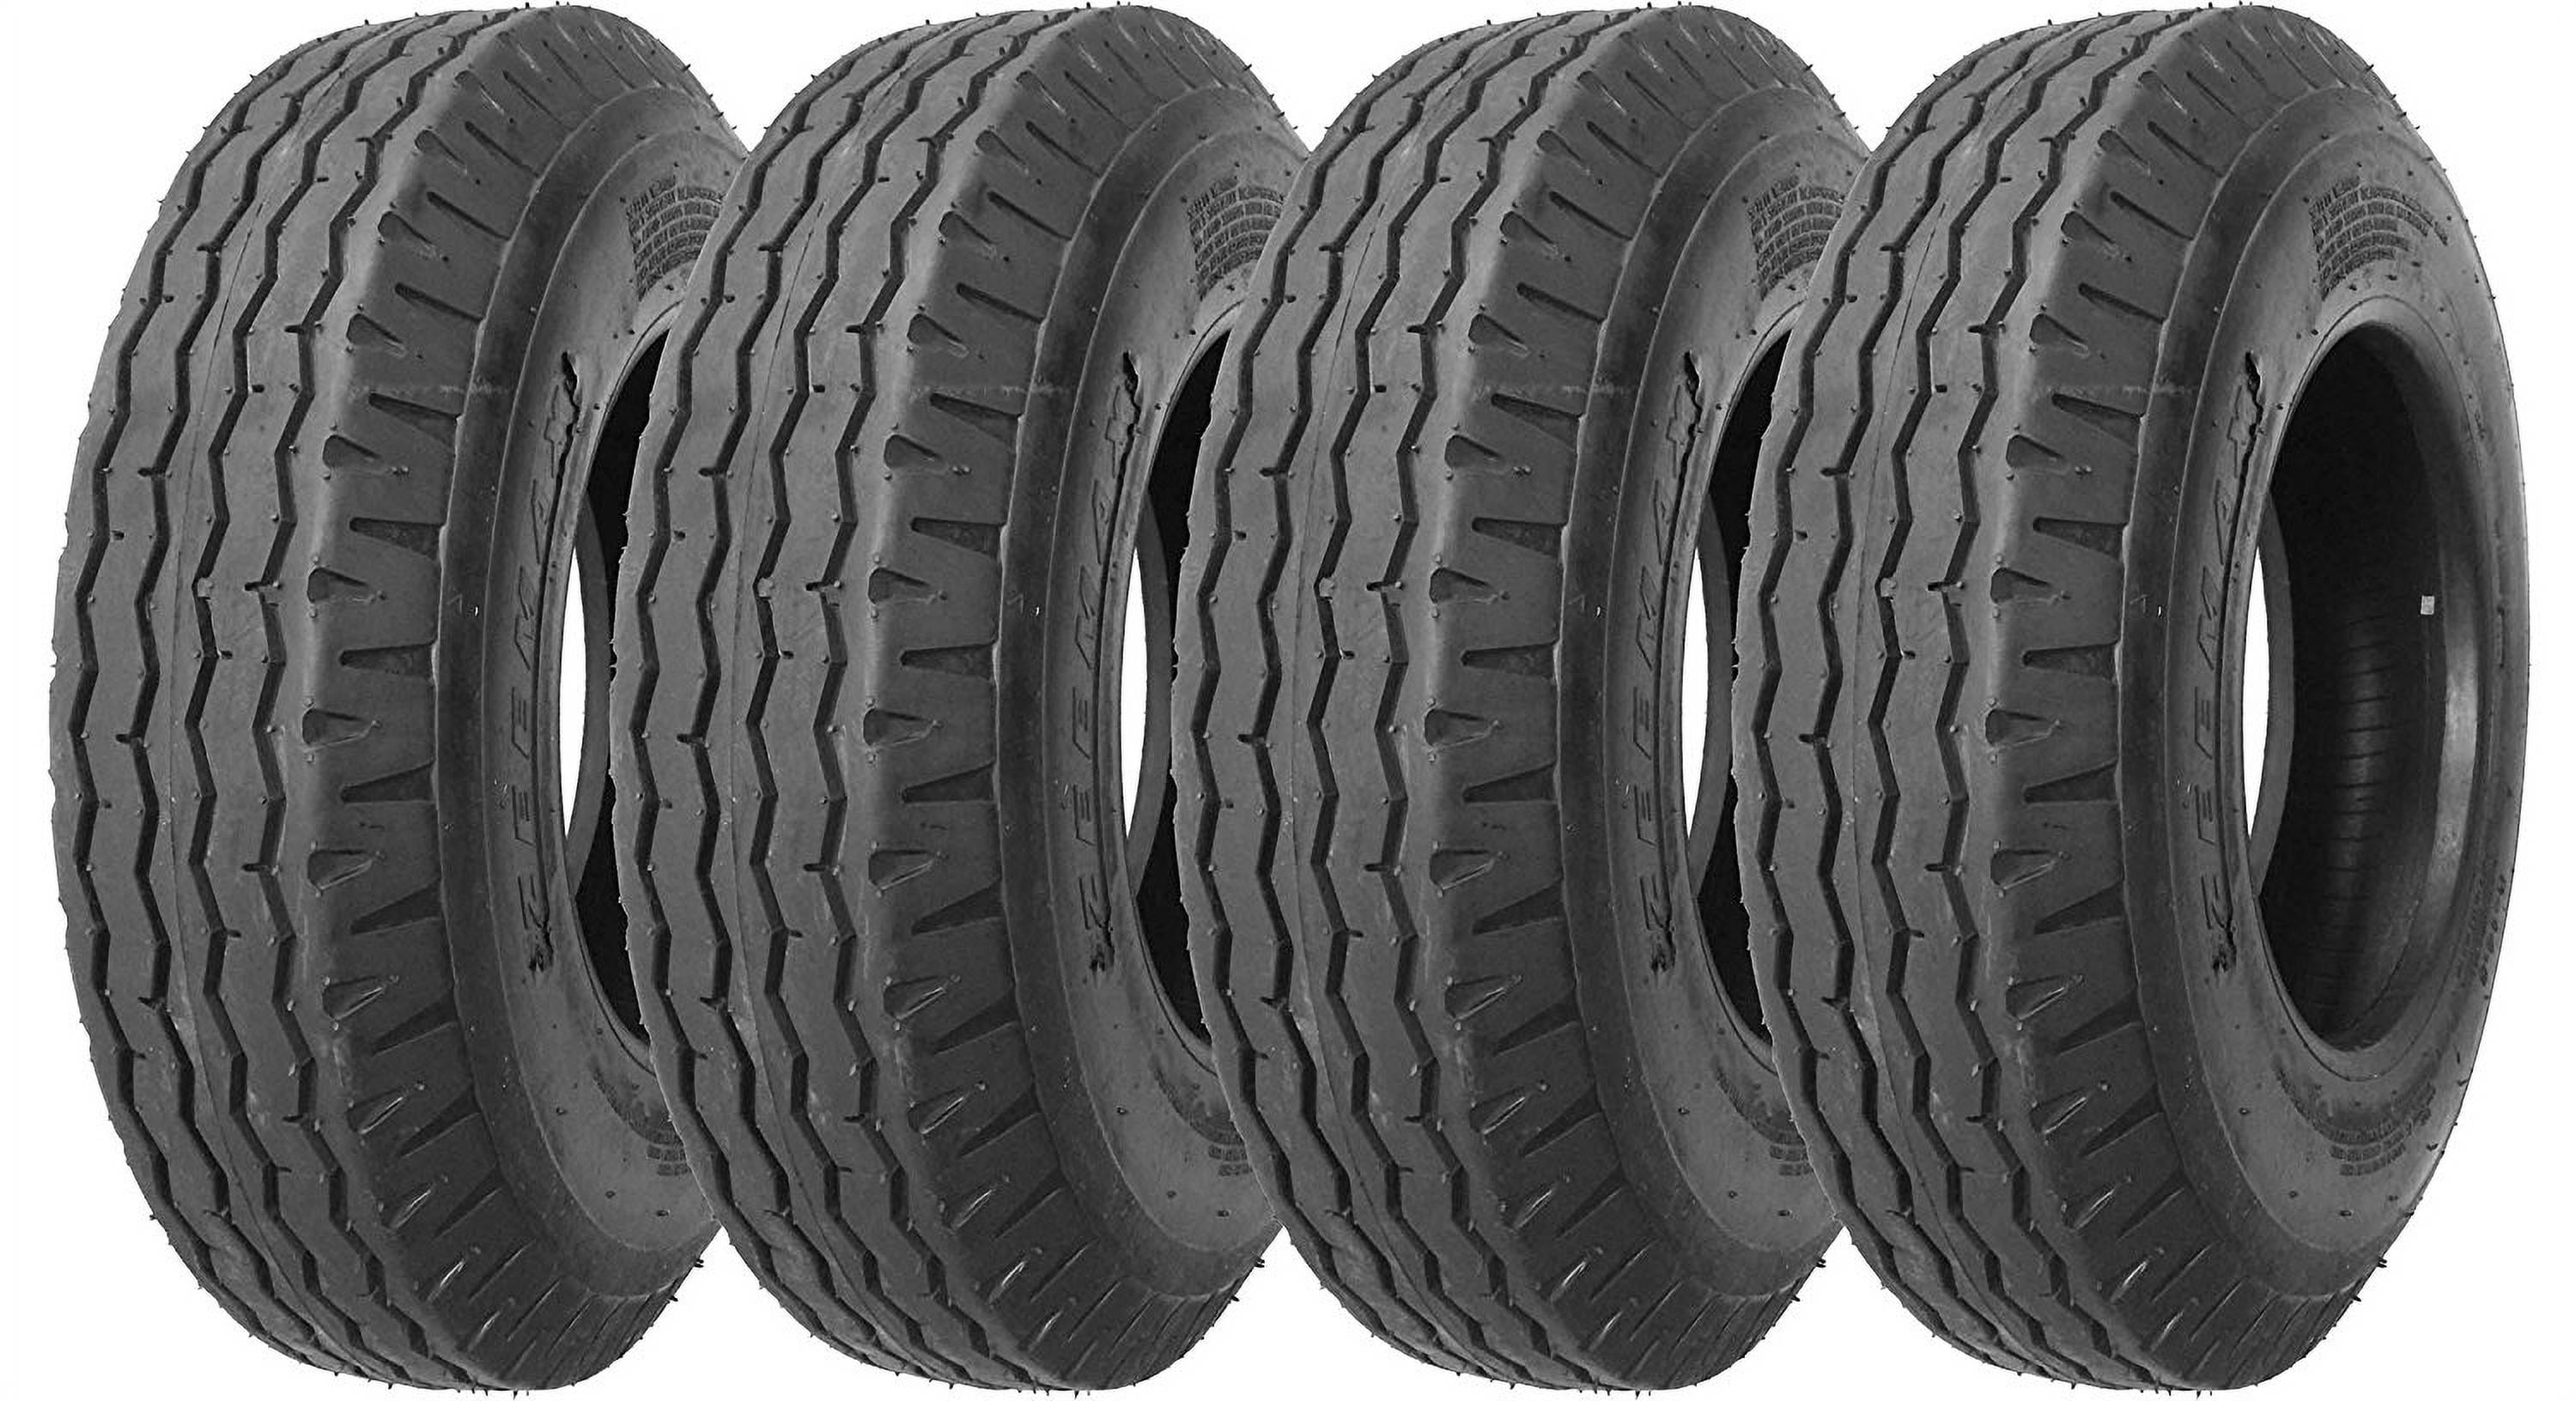 Tire Application: Sandy and muddy conditions Rim Size: 19 Tire Type: Offroad Position: Rear Load Rating: 62 Speed Rating: M 4.50x19 PIVOTRAX SAND Motocross Tire Size: 110/90-19 